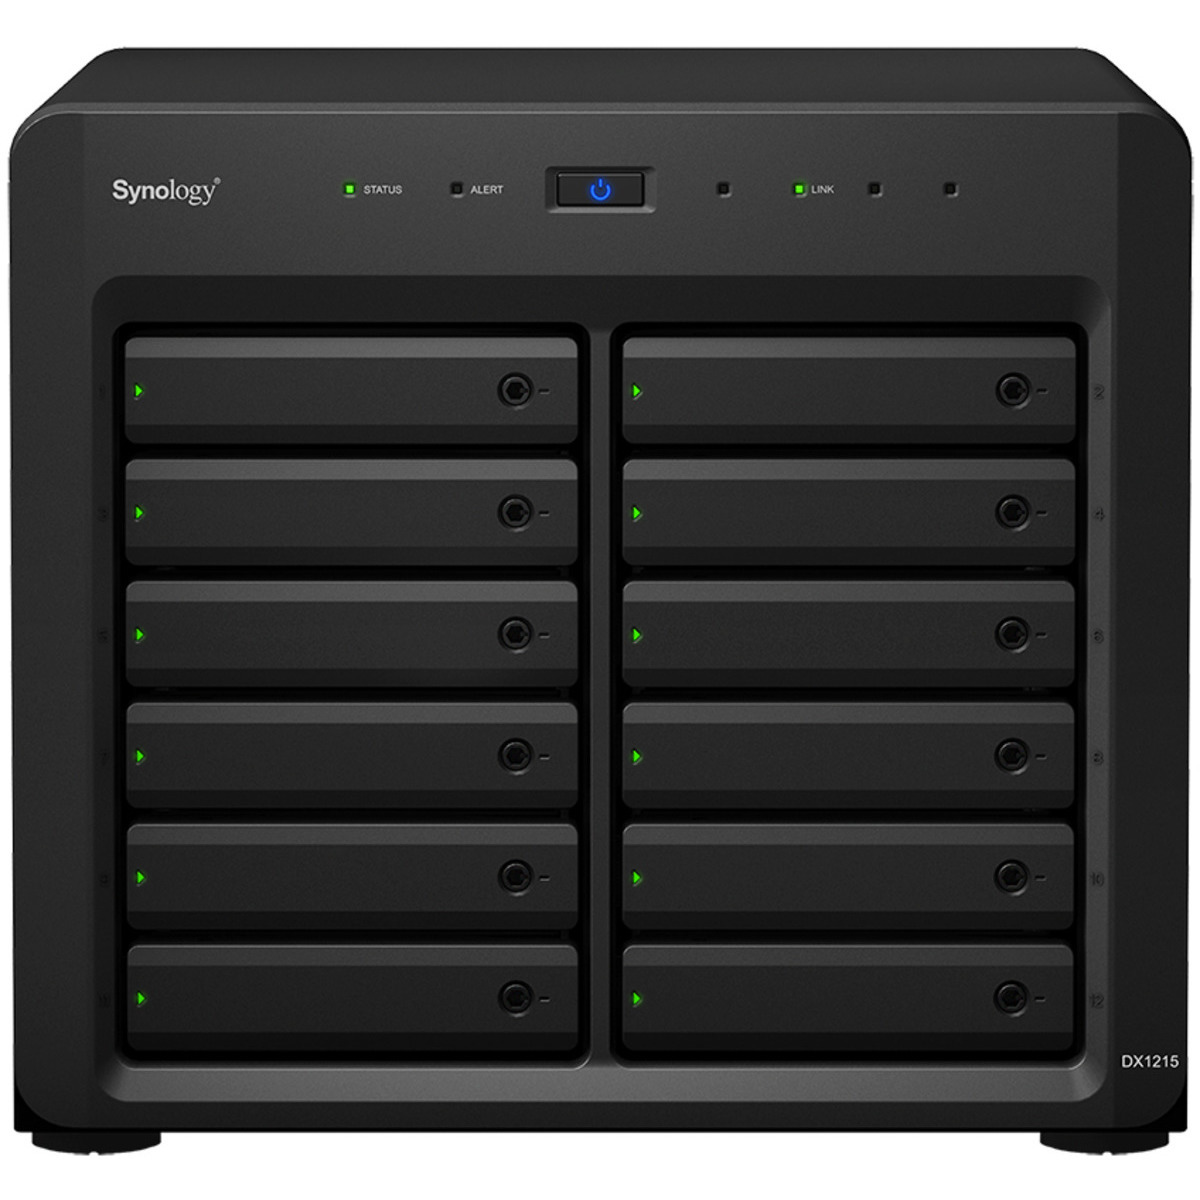 Synology DX1215II External Expansion Drive 112tb 12-Bay Desktop Multimedia / Power User / Business Expansion Enclosure 8x14tb Western Digital Red Pro WD142KFGX 3.5 7200rpm SATA 6Gb/s HDD NAS Class Drives Installed - Burn-In Tested DX1215II External Expansion Drive